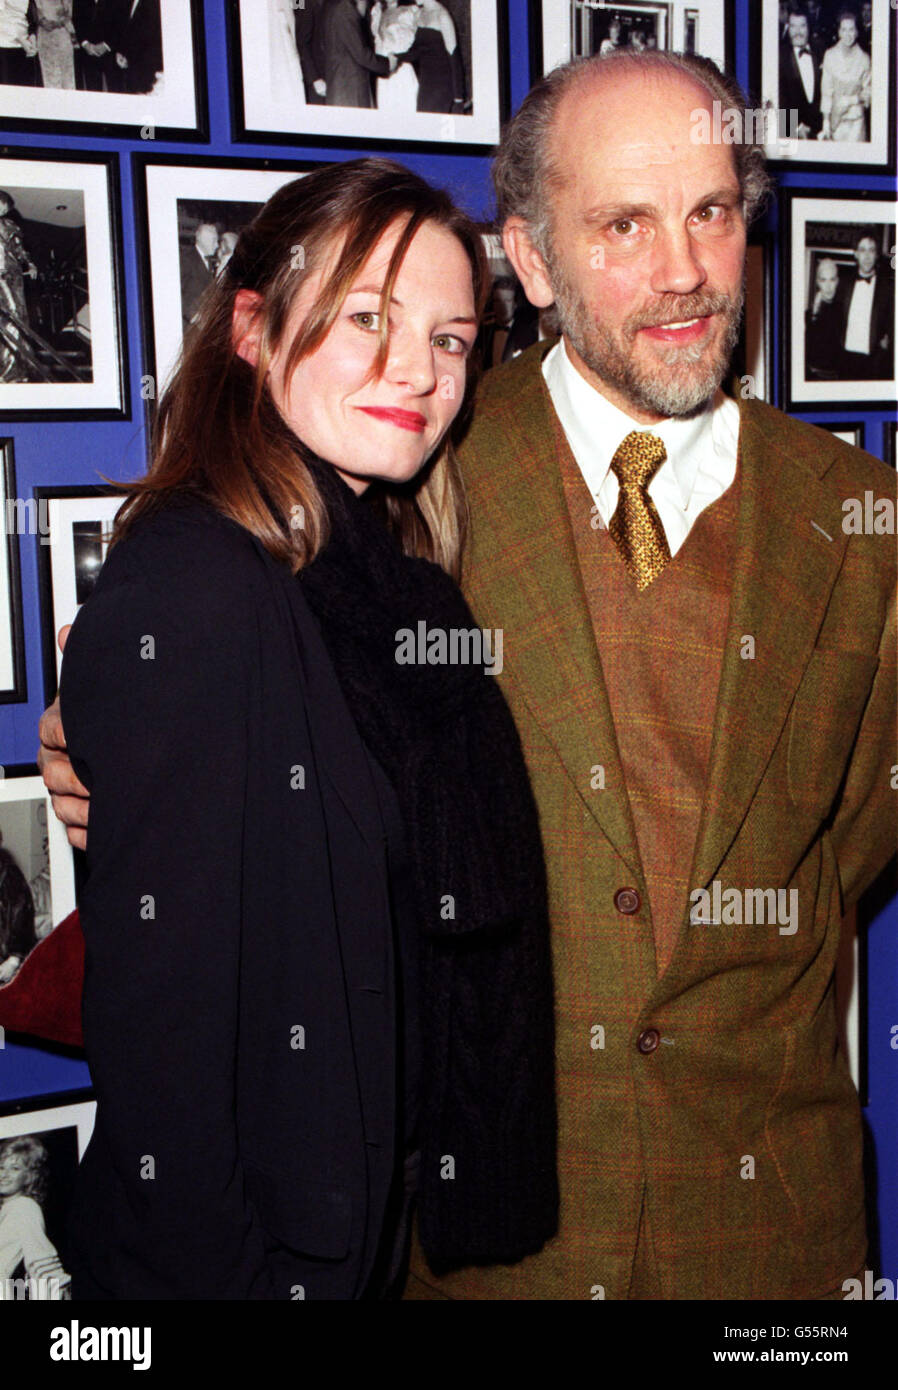 American actor John Malkovich and actress Catherine McCormack, two of the stars of 'Shadow of the Vampire', arrive for the film's premiere, which is part of the London Film Festival, at the Odeon West End cinema. Stock Photo